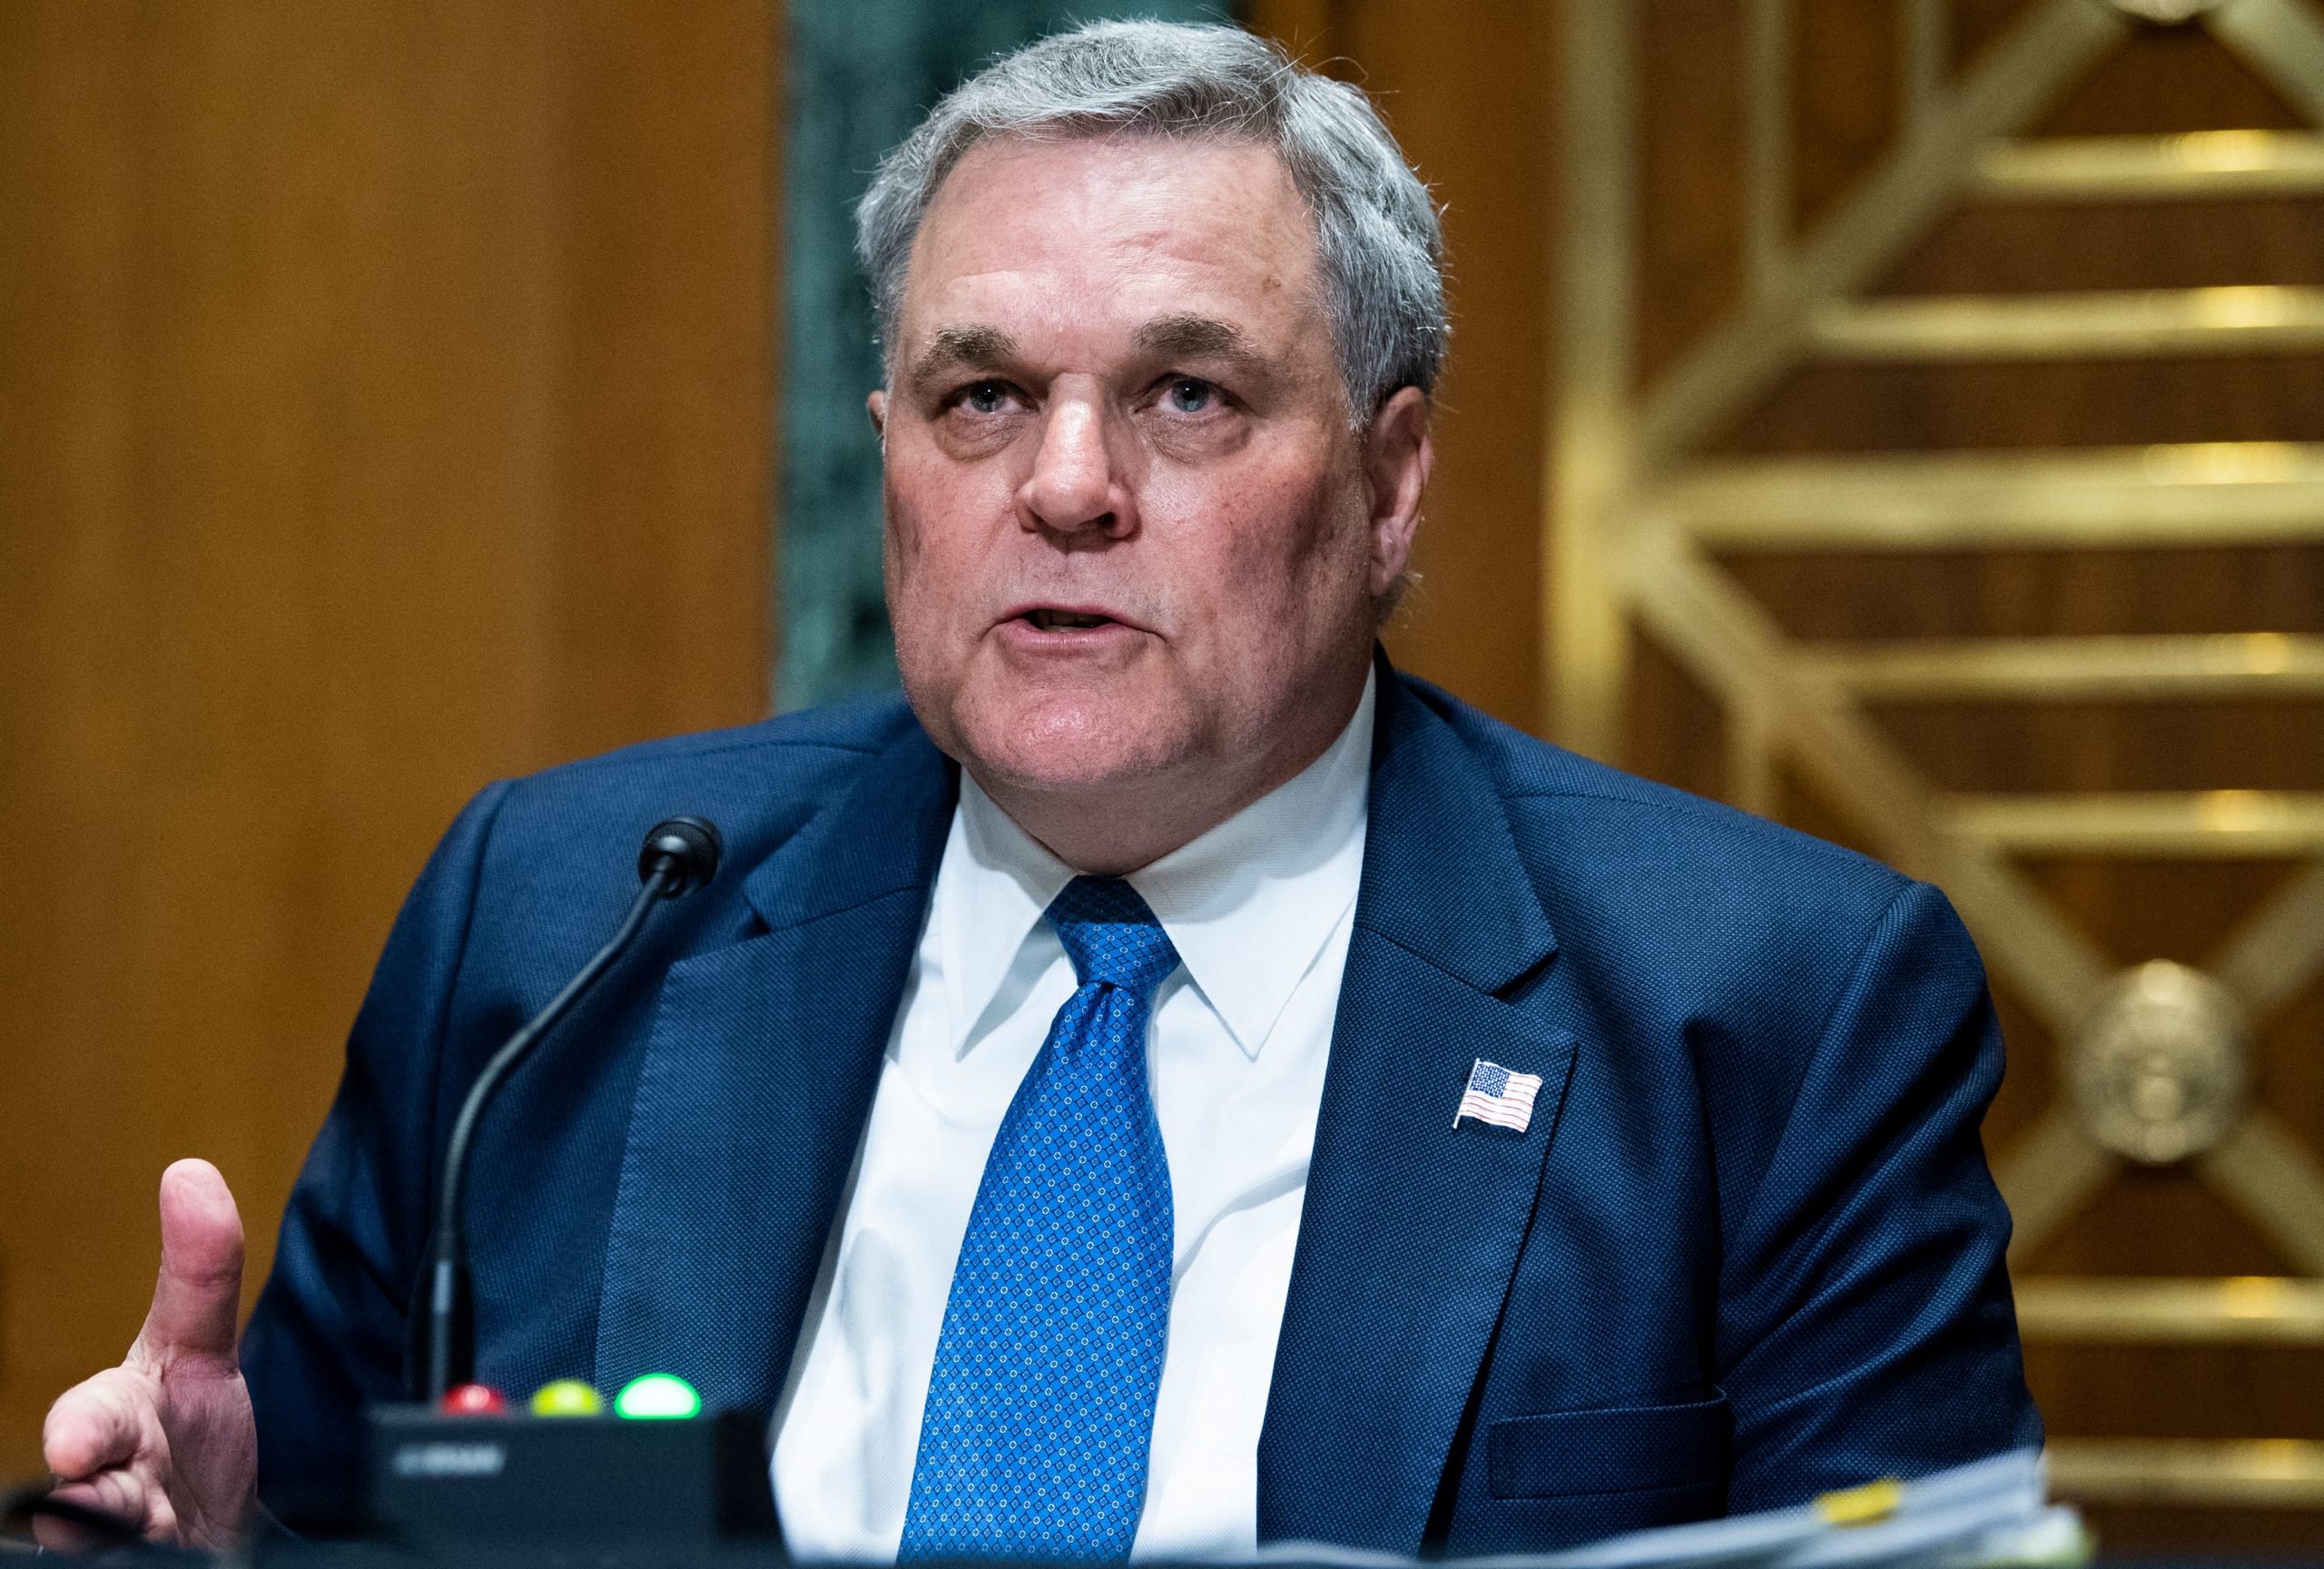 Charles P. Rettig, commissioner of the Internal Revenue Service, testifies during a Senate Finance Committee hearing on the IRS budget request on Capitol Hill in Washington,DC on June 8, 2021. (Photo by Tom Williams / POOL / AFP) (Photo by TOM WILLIAMS/POOL/AFP via Getty Images)